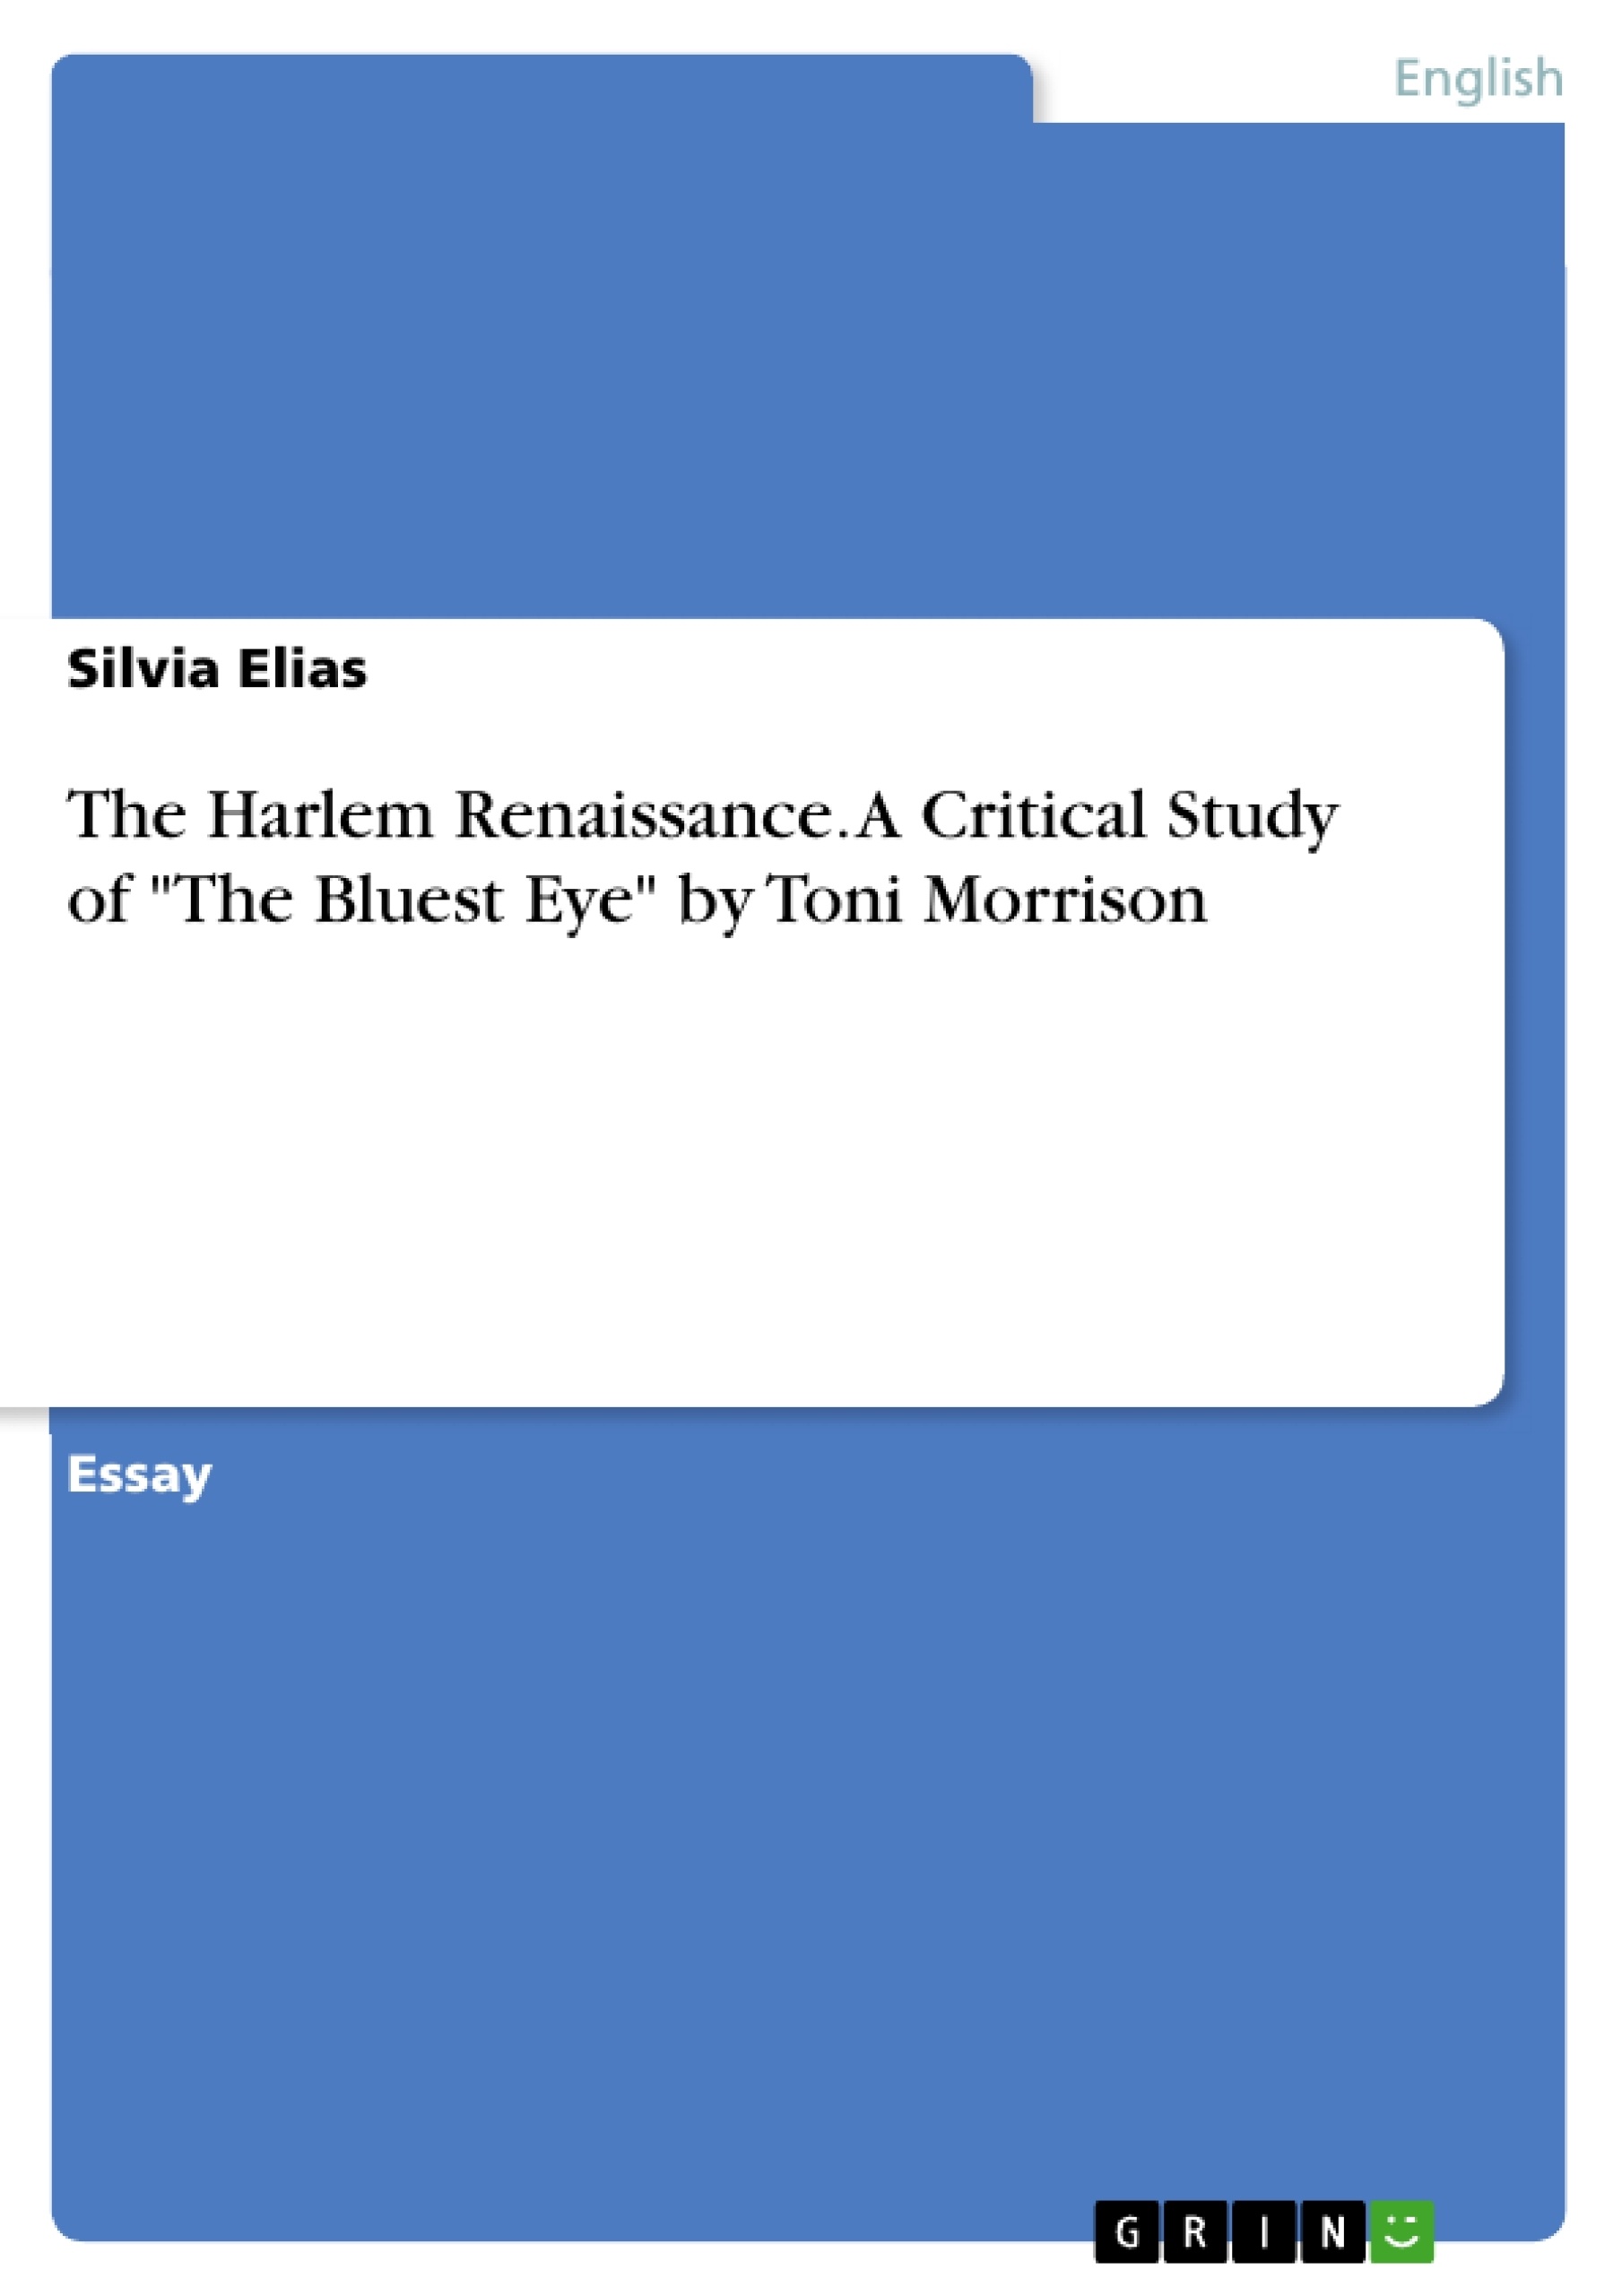 Title: The Harlem Renaissance. A Critical Study of "The Bluest Eye" by Toni Morrison